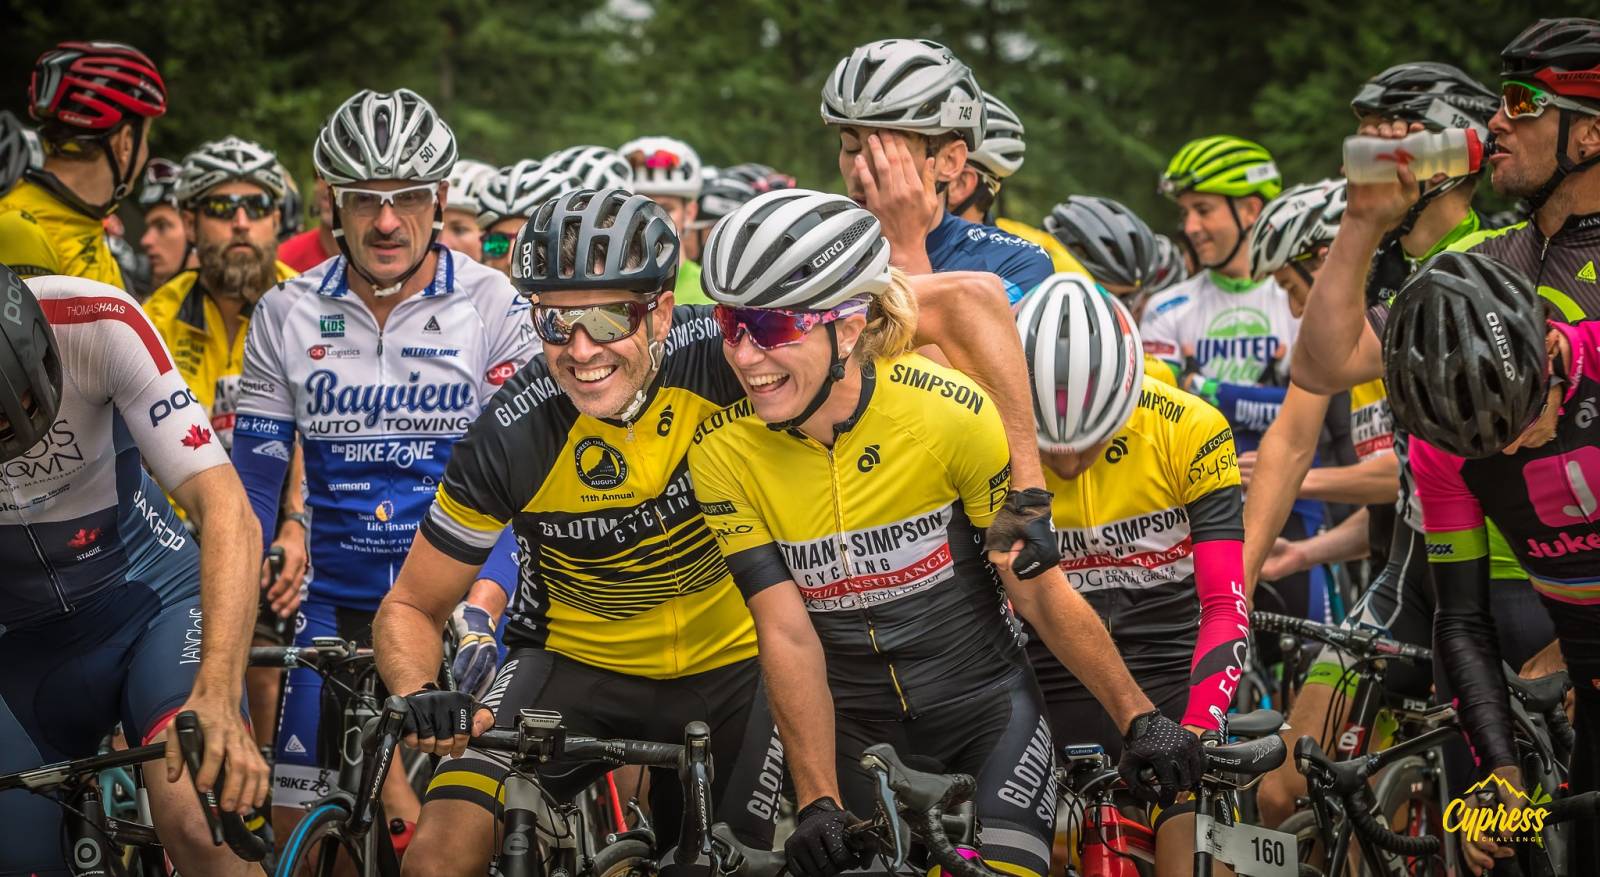 Cyclists at the Cypress Challenge, Canada's largest fundraiser for pancreatic cancer research